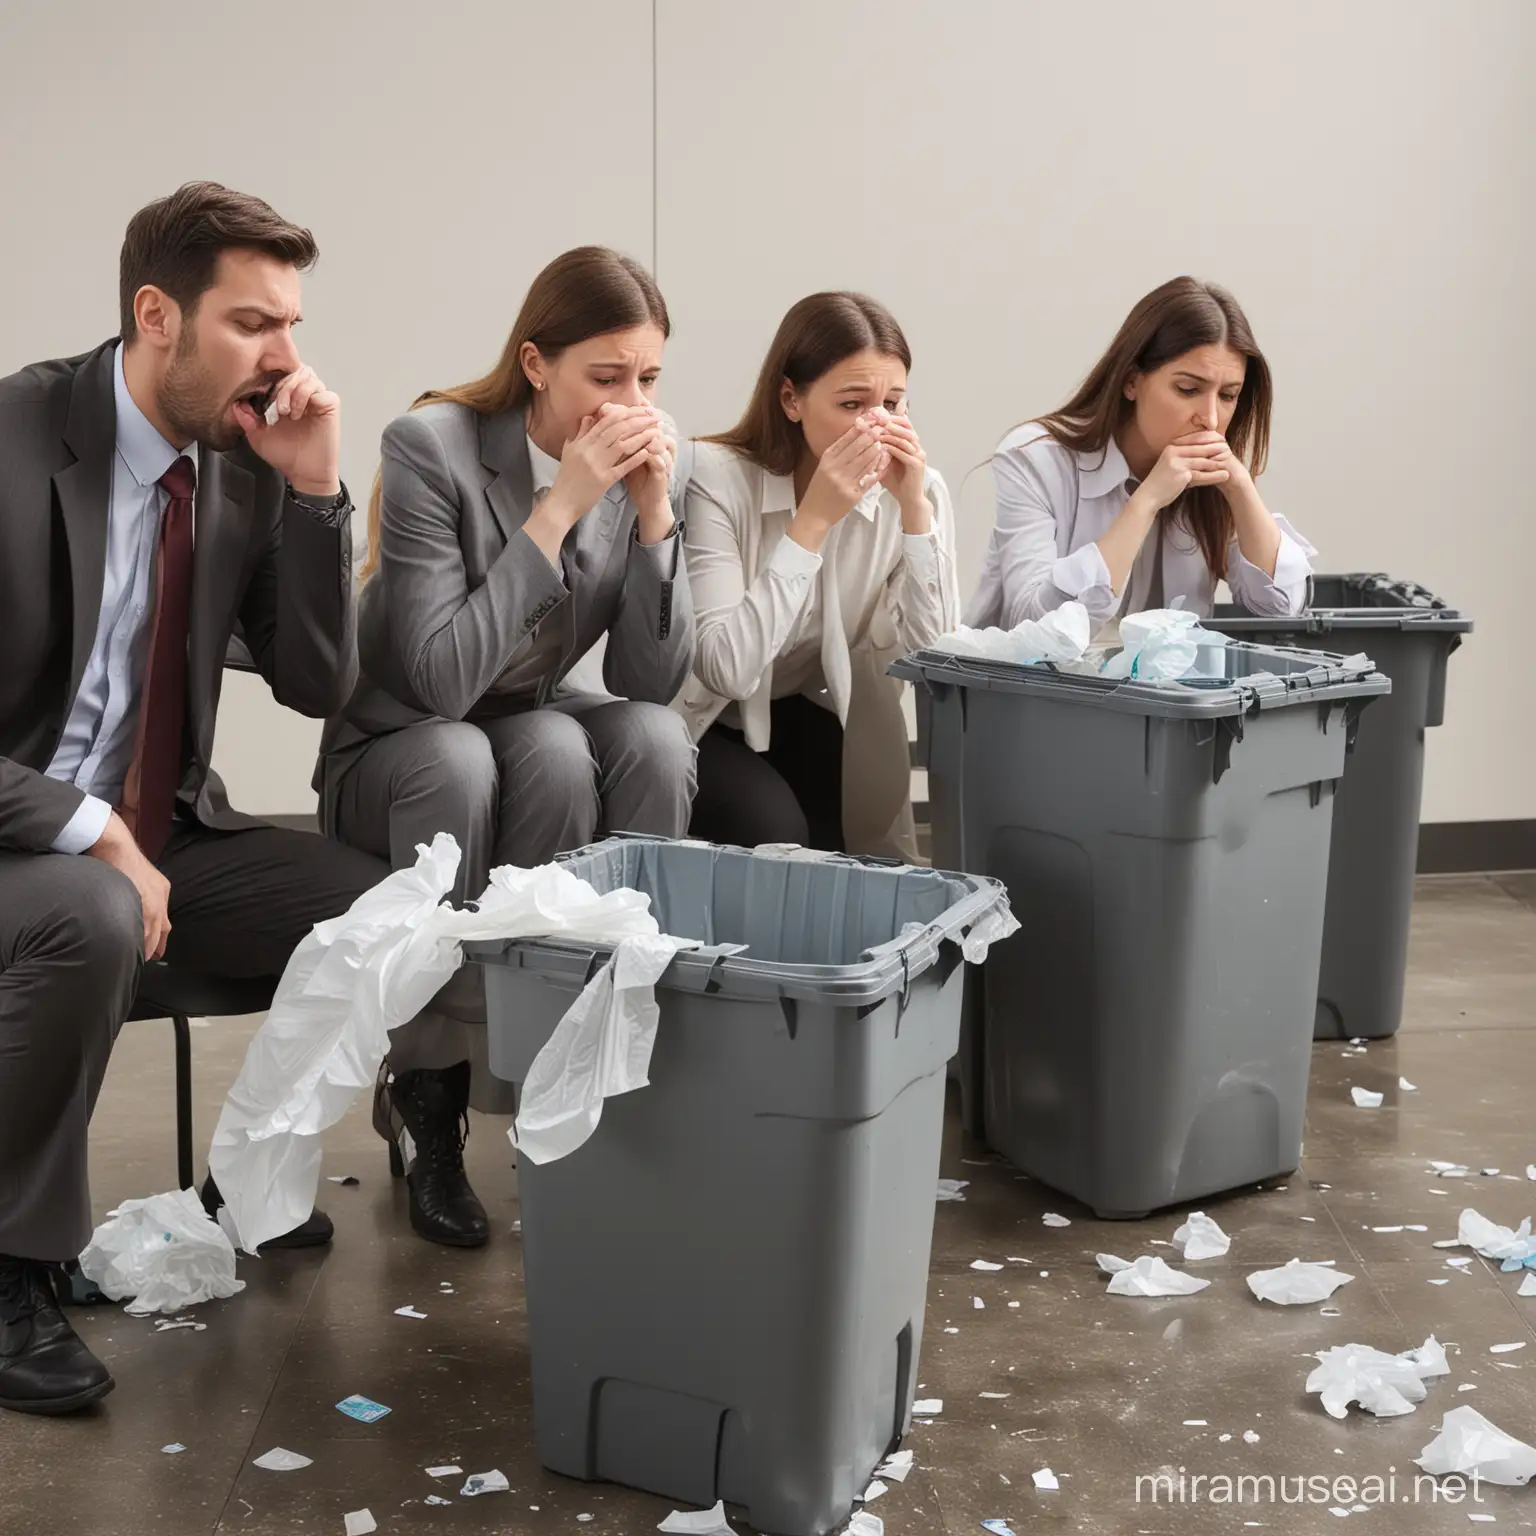 several office employees leaning head into office garbage cans vomiting